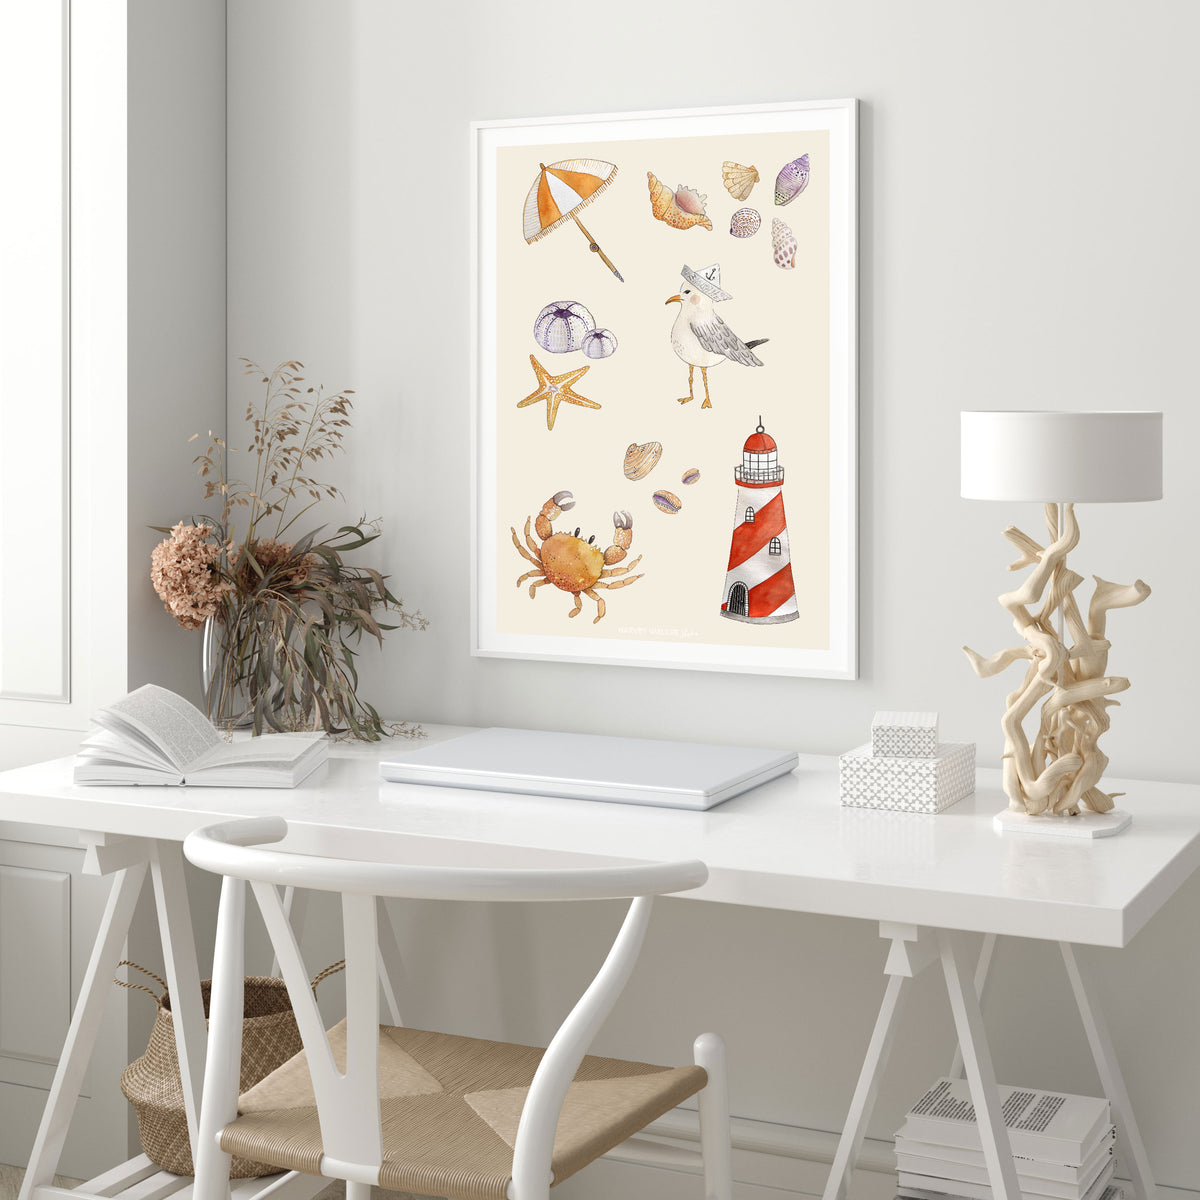 Modern coastal office print. Warm tones of beige and orange. The crab will bring your office to life and the lighthouse will bring a timeless quality. Shown here with a white desk, designer office chair and driftwood lamp.